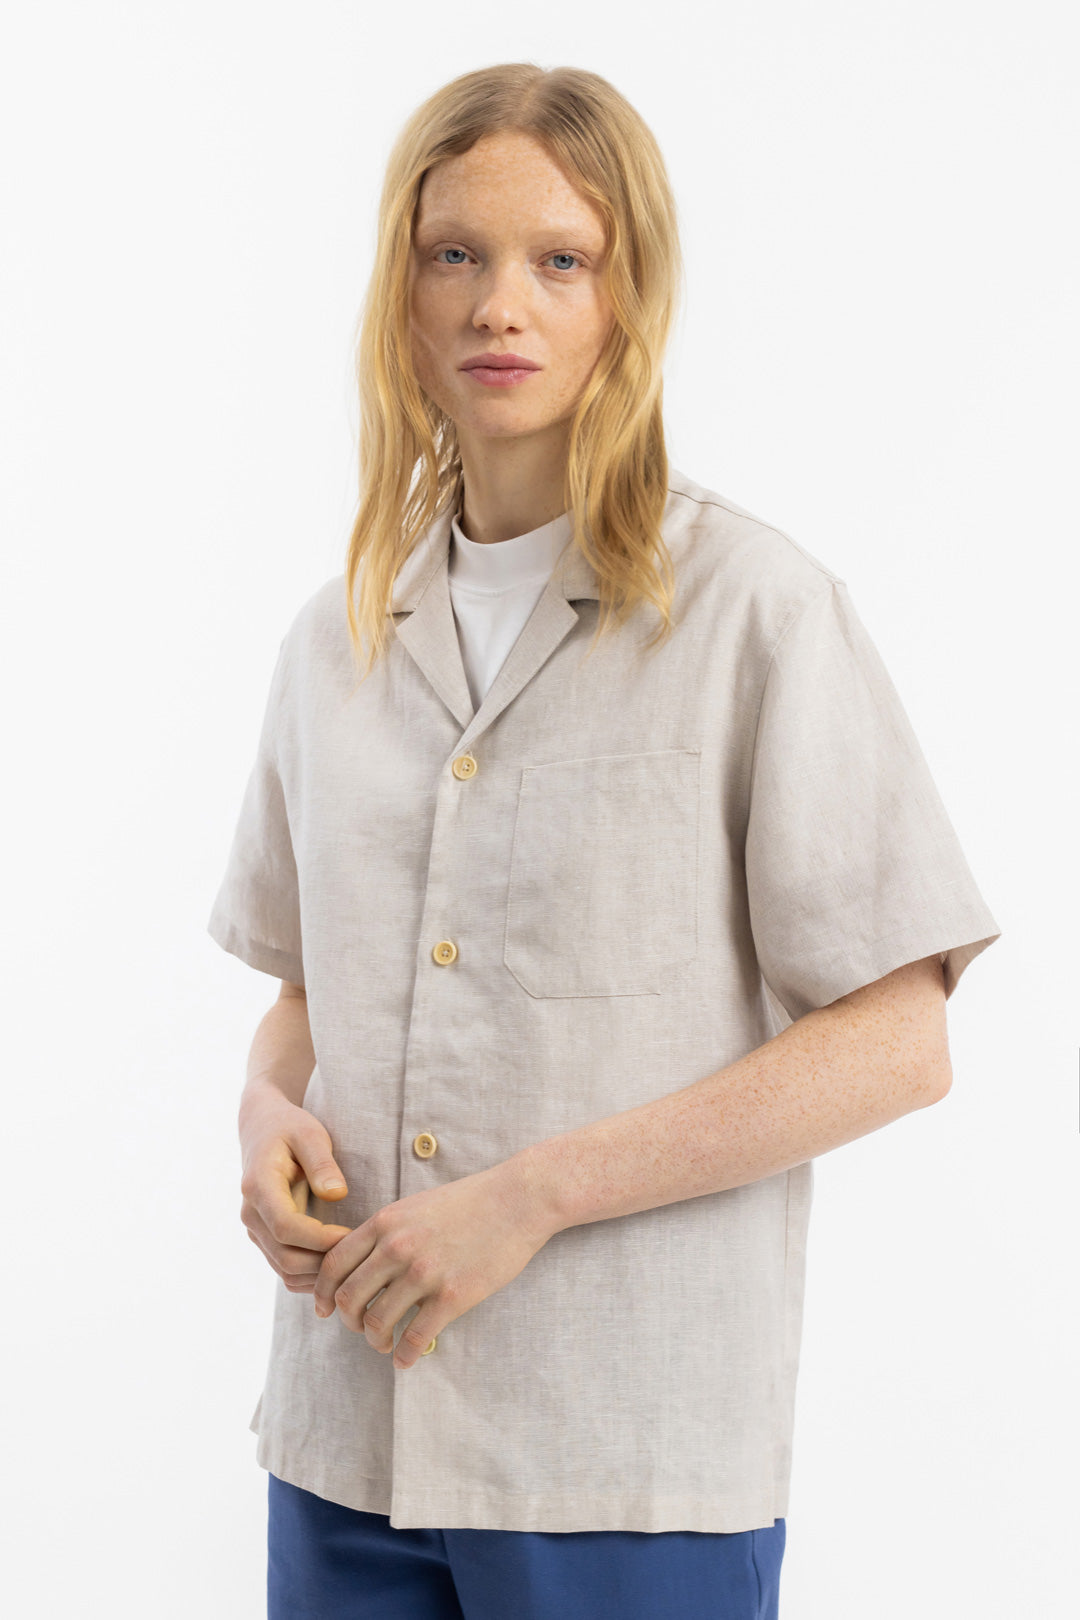 White bowling shirt made of organic cotton by Rotholz